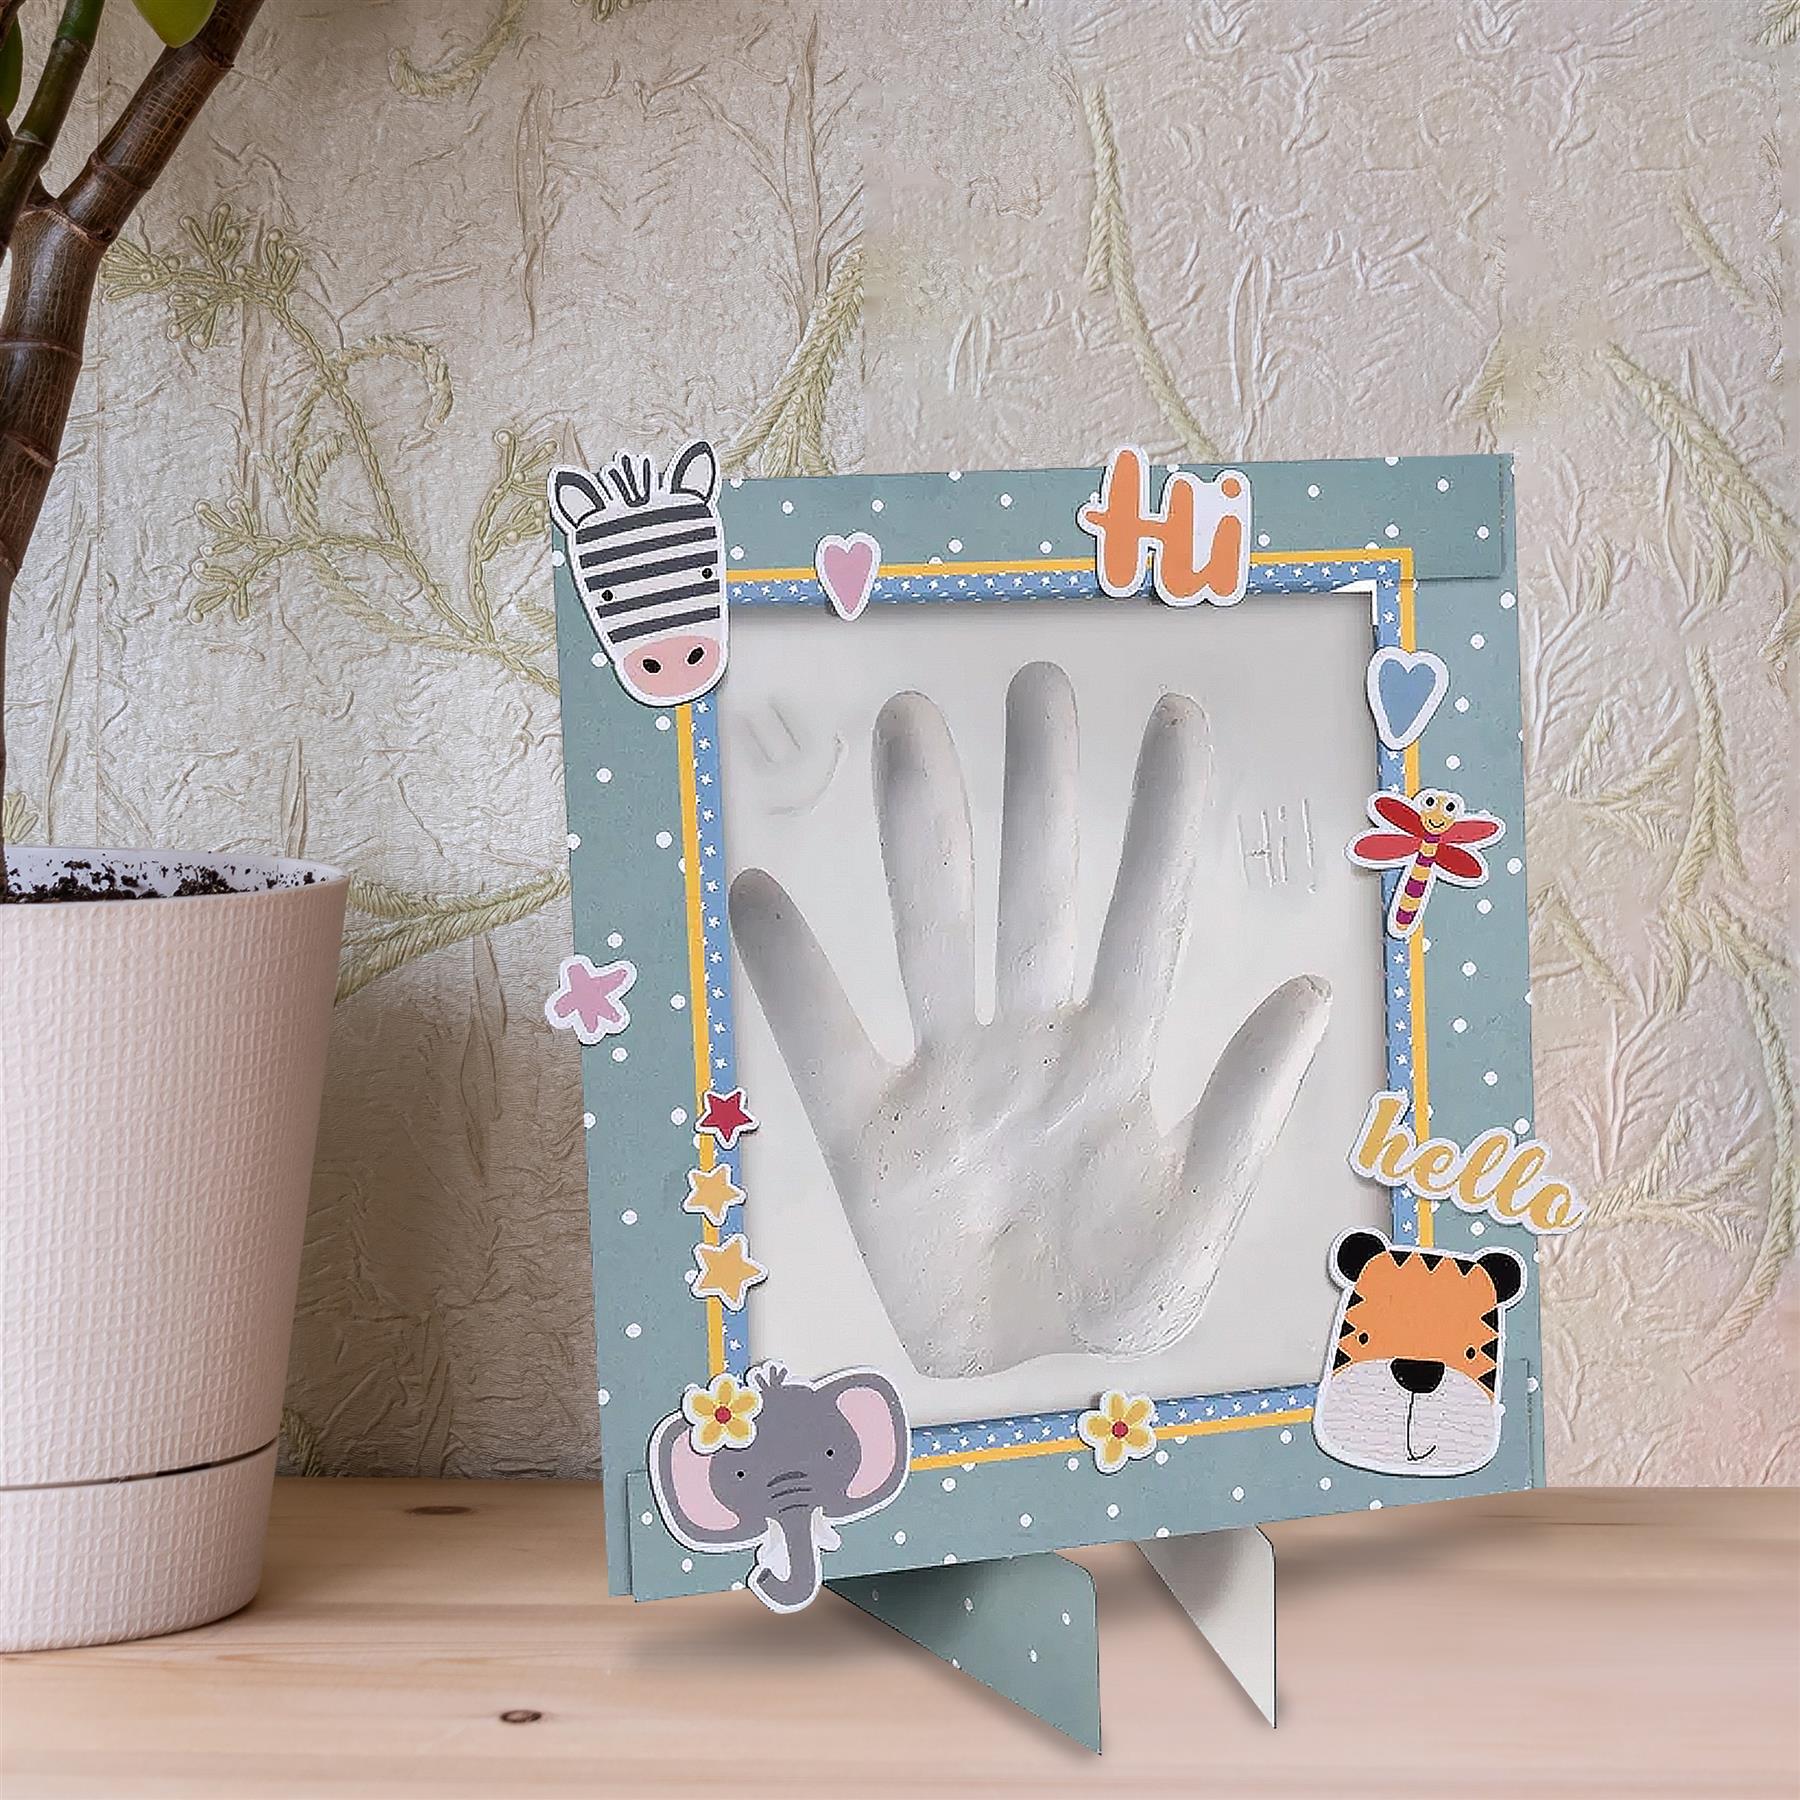 Handprint Plaster Moulding Kit by The Magic Toy Shop - The Magic Toy Shop